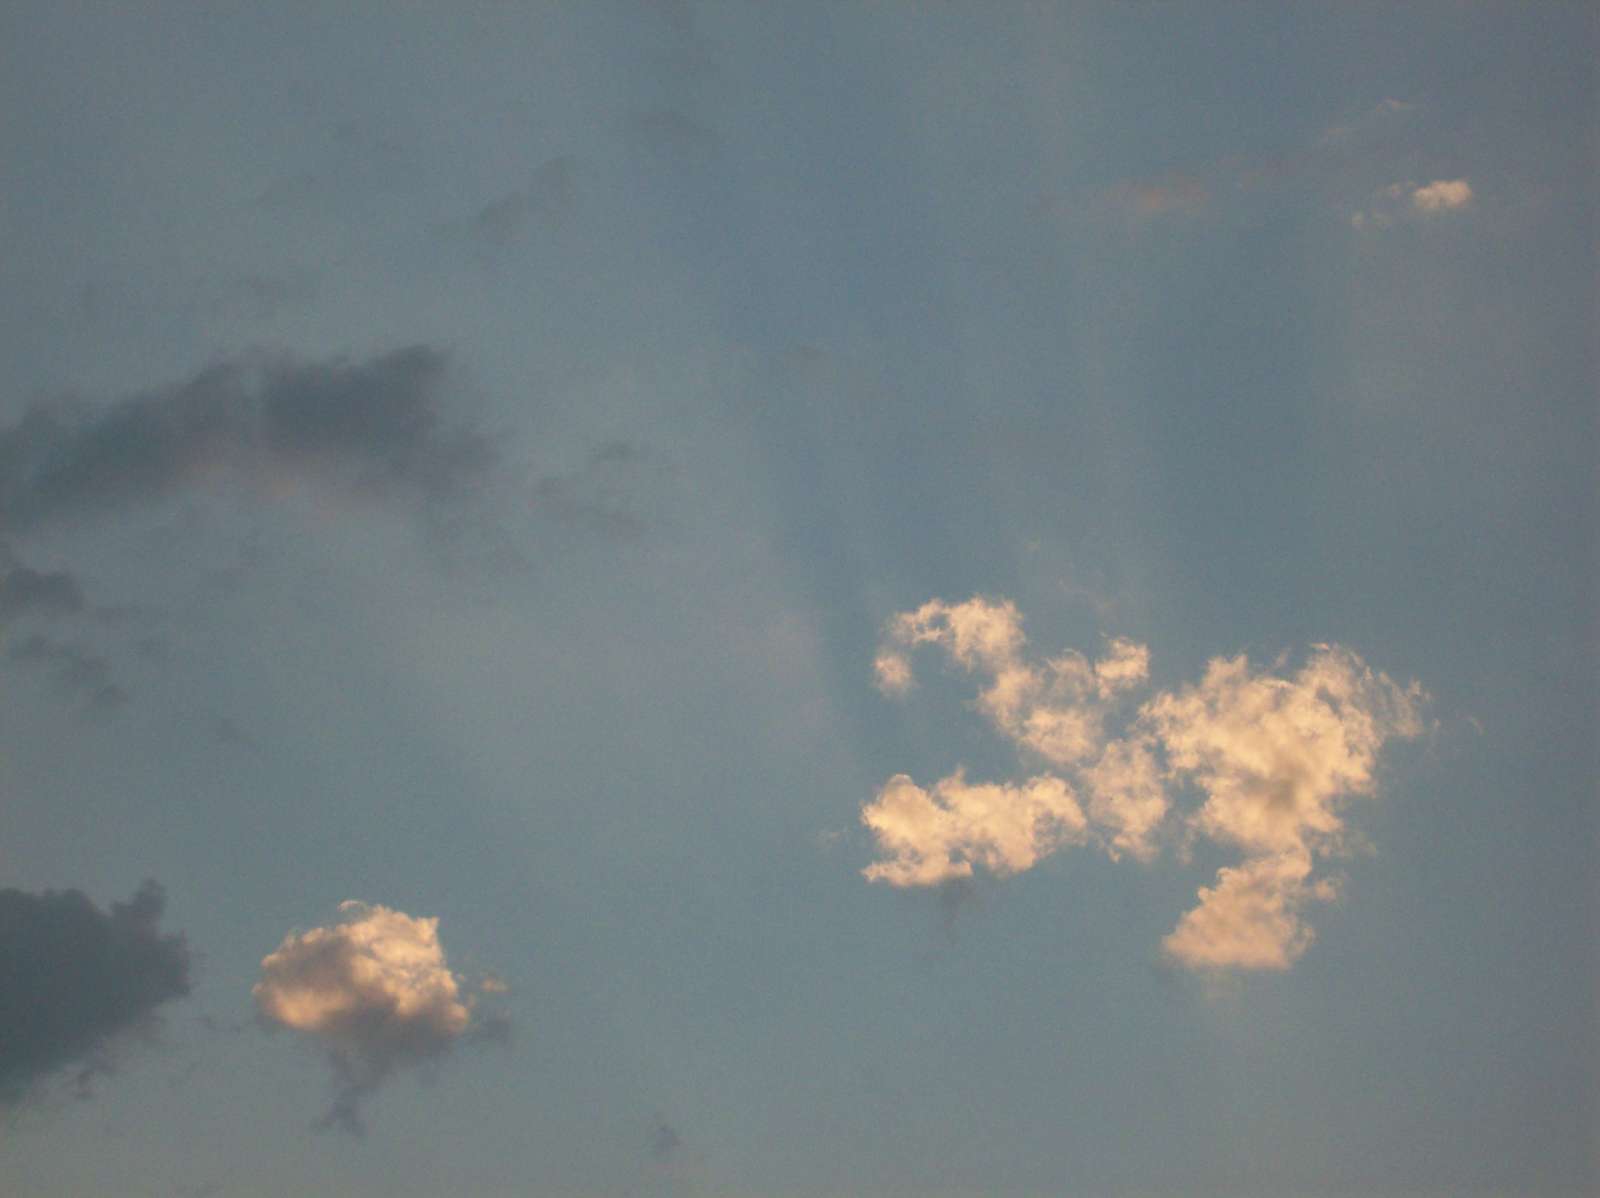 Small clouds: 60 KB; click on the image to enlarge